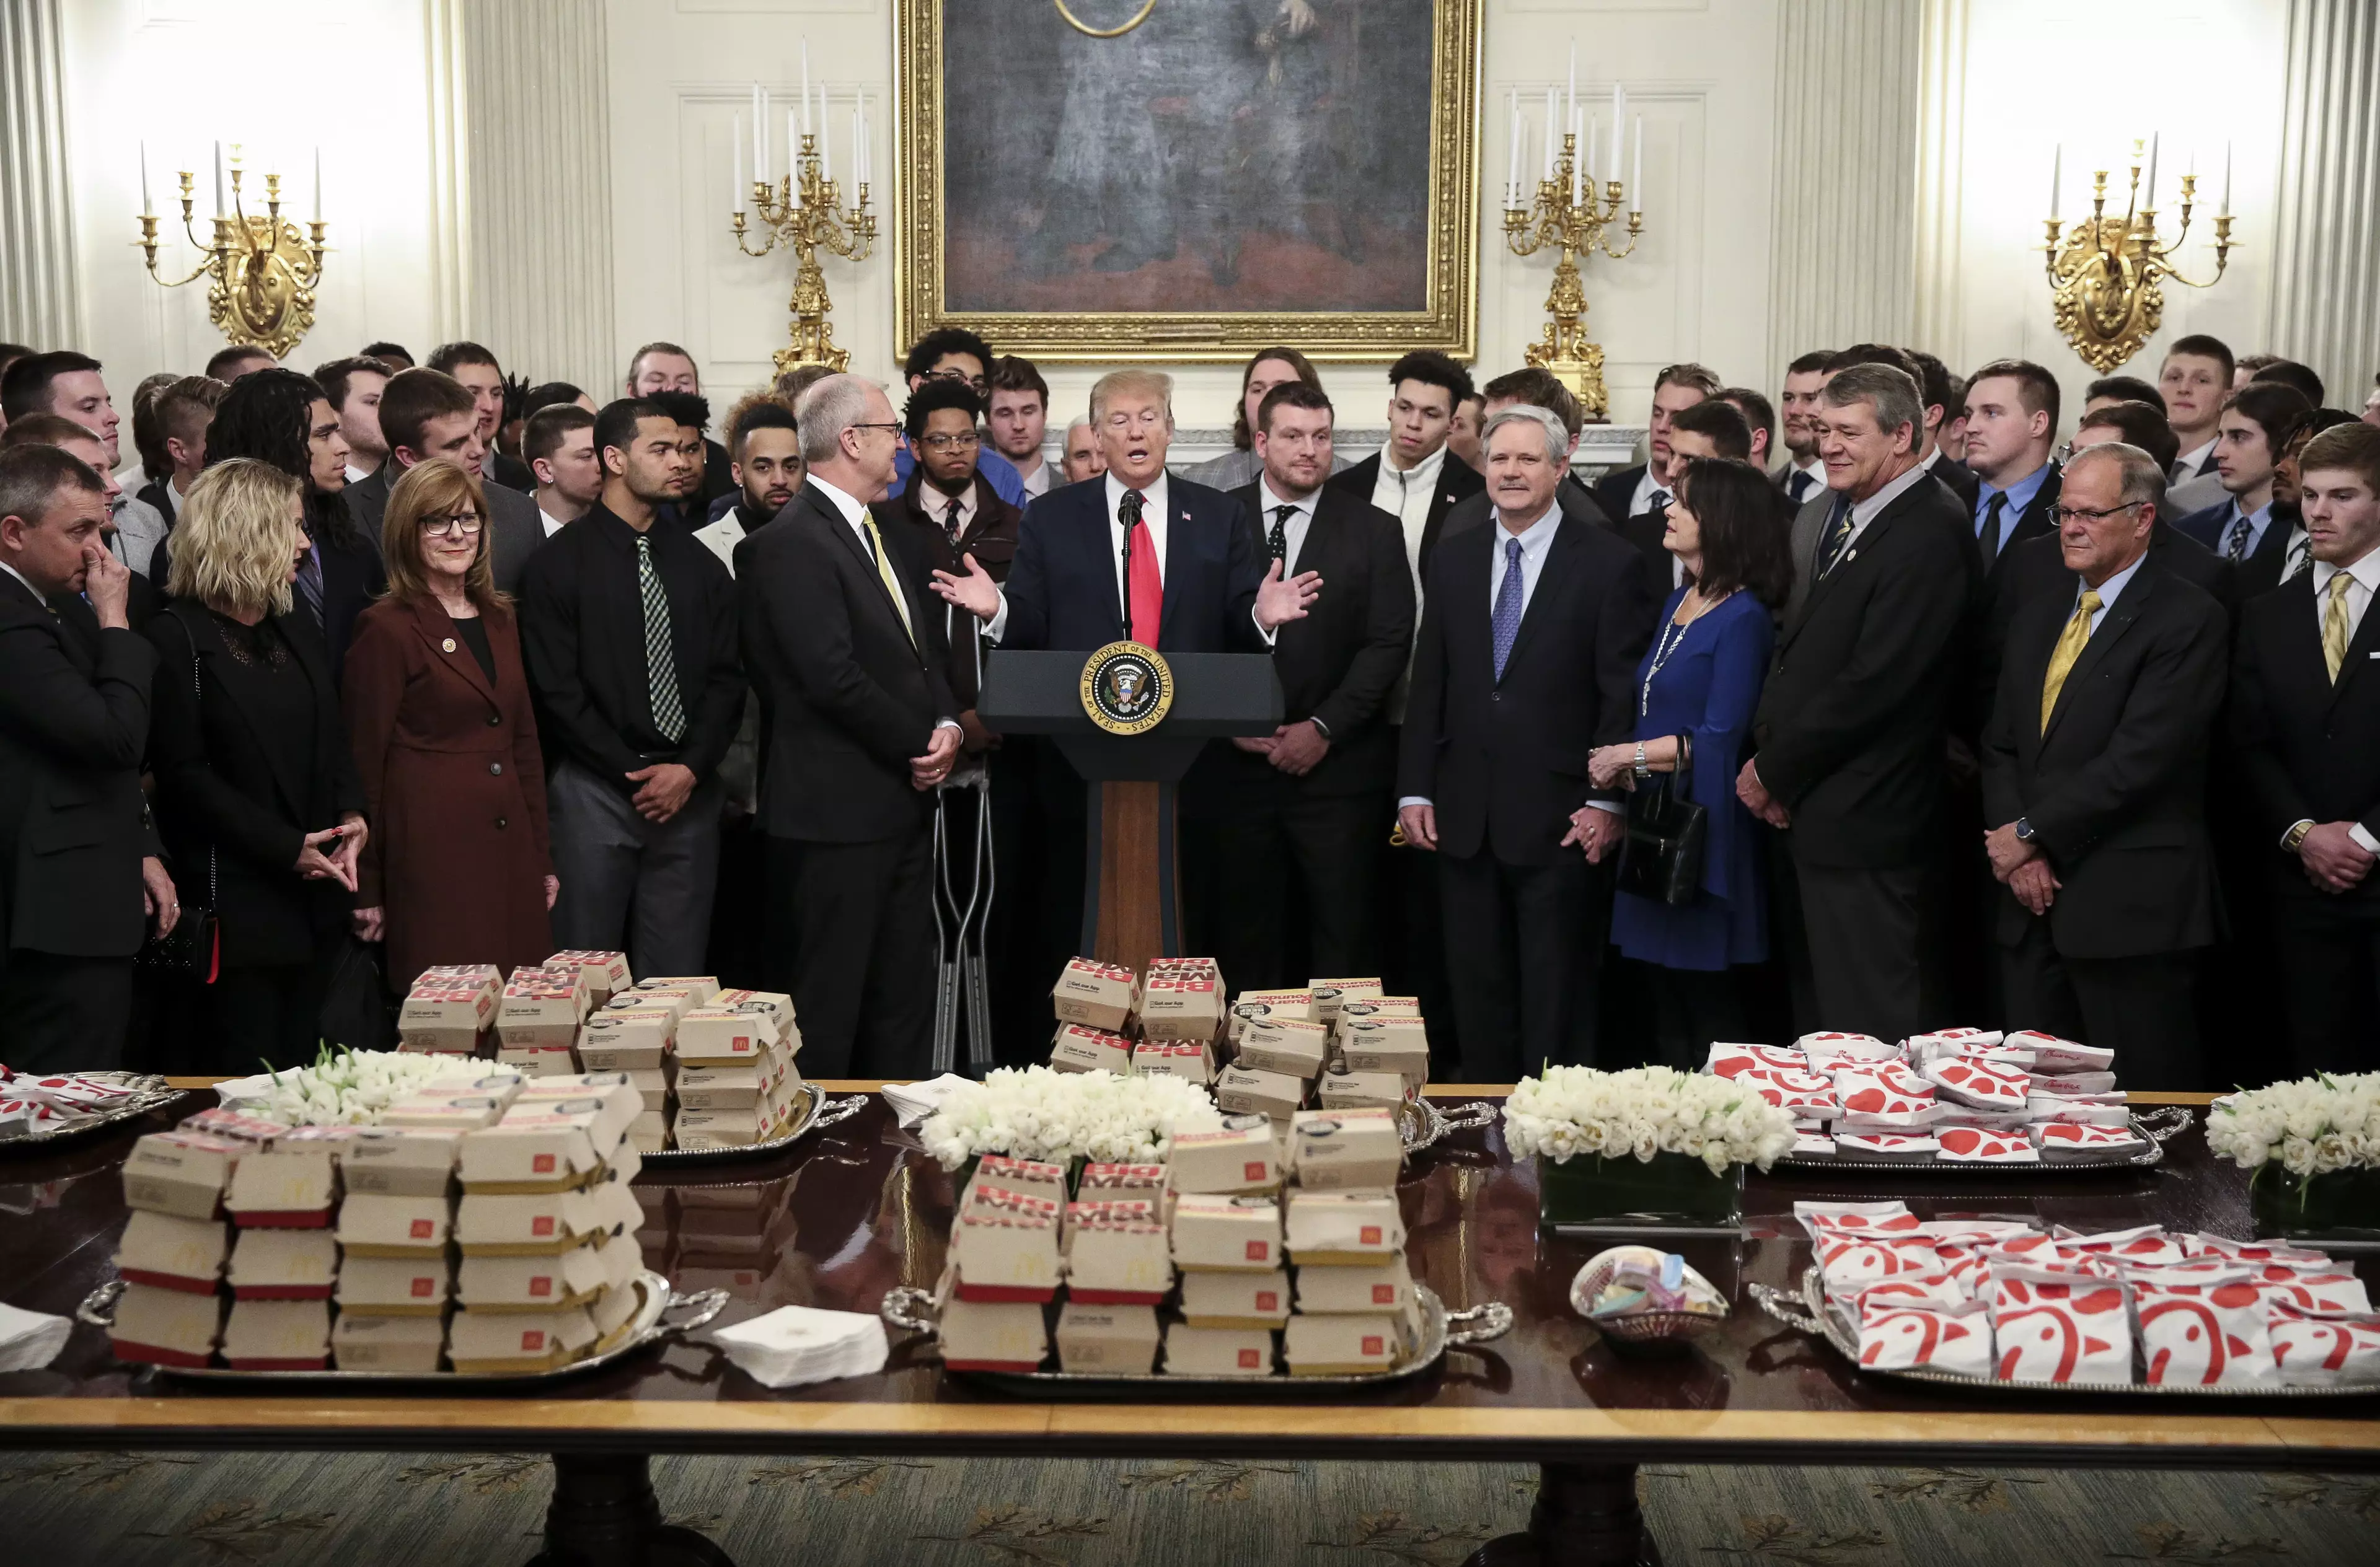 Trump famously catered a visit from an American football team with McDonald's.